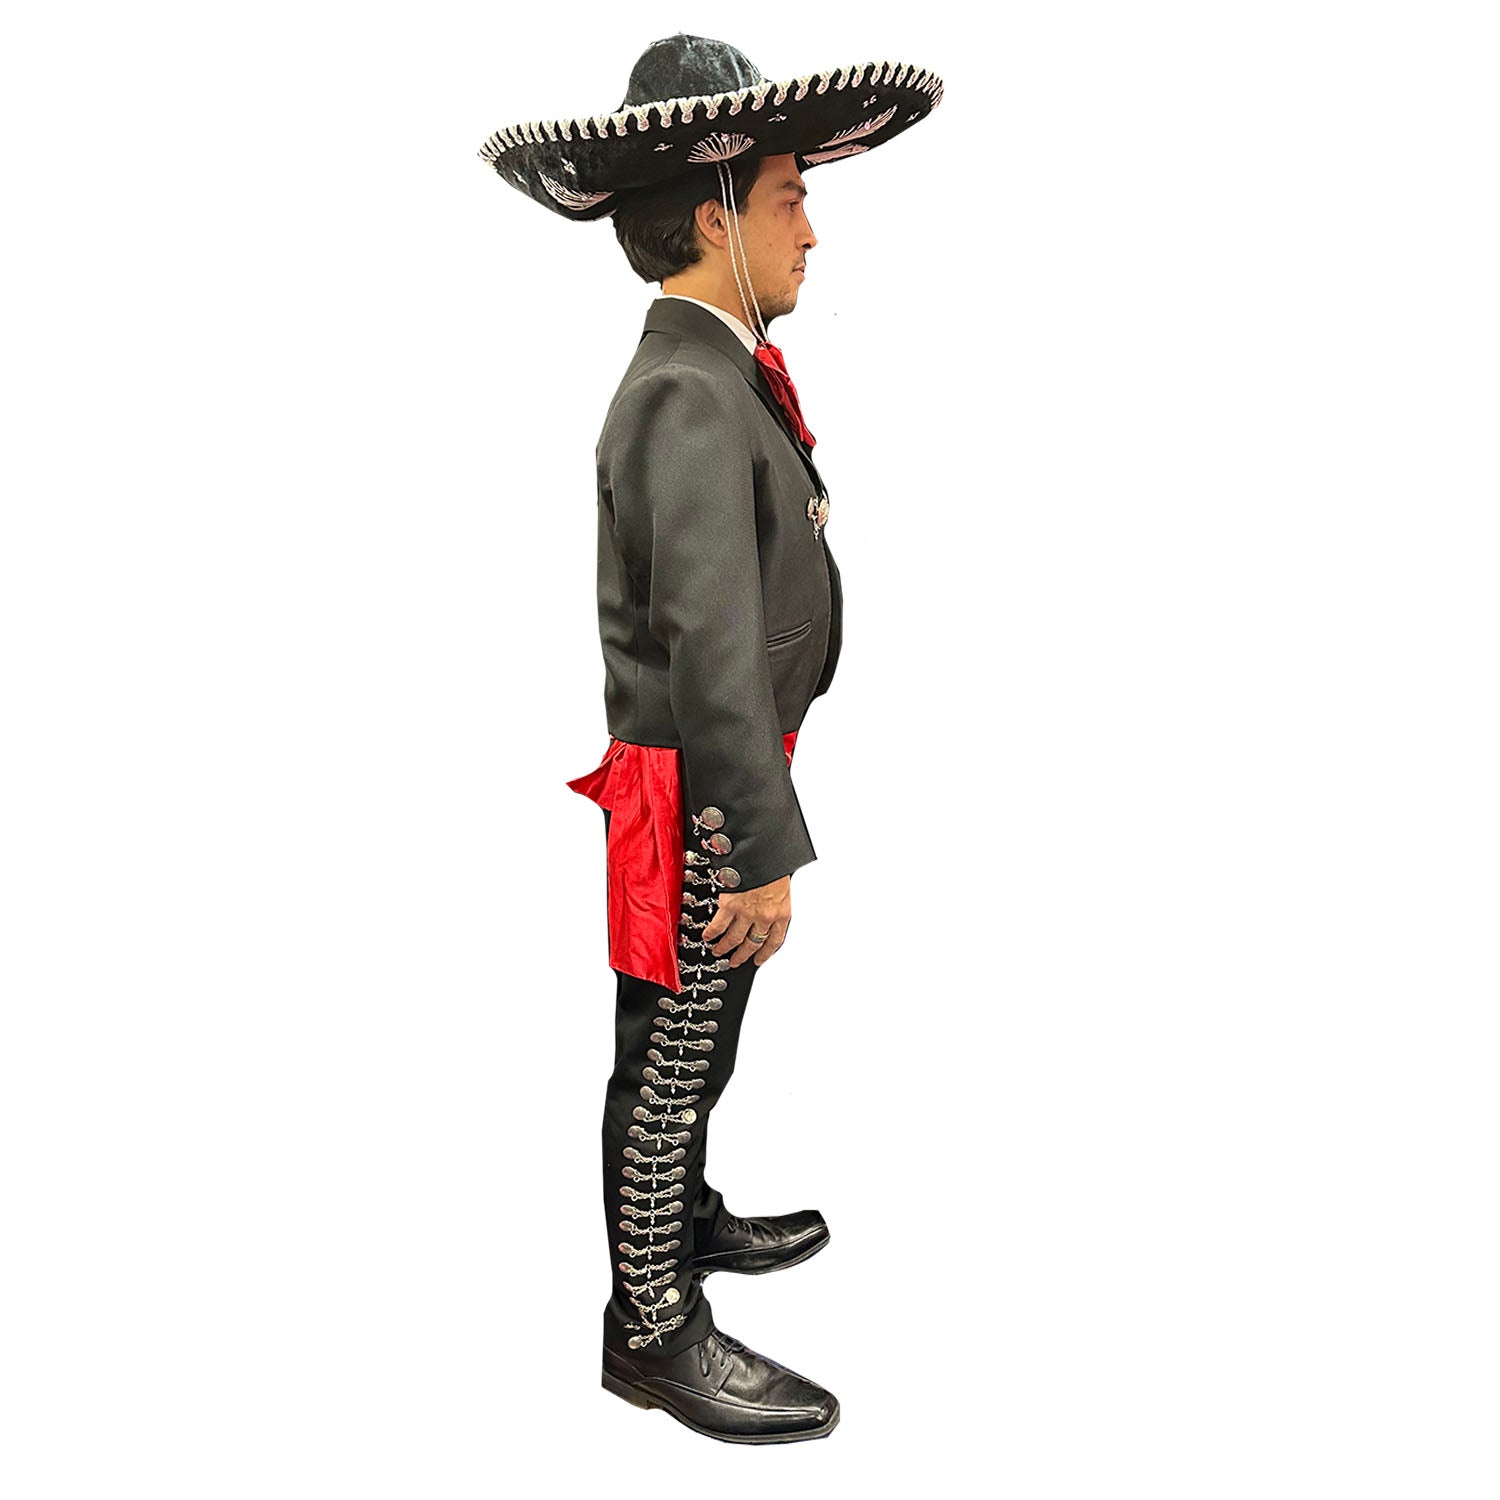 Deluxe Mariachi Black & Red Adult Costume